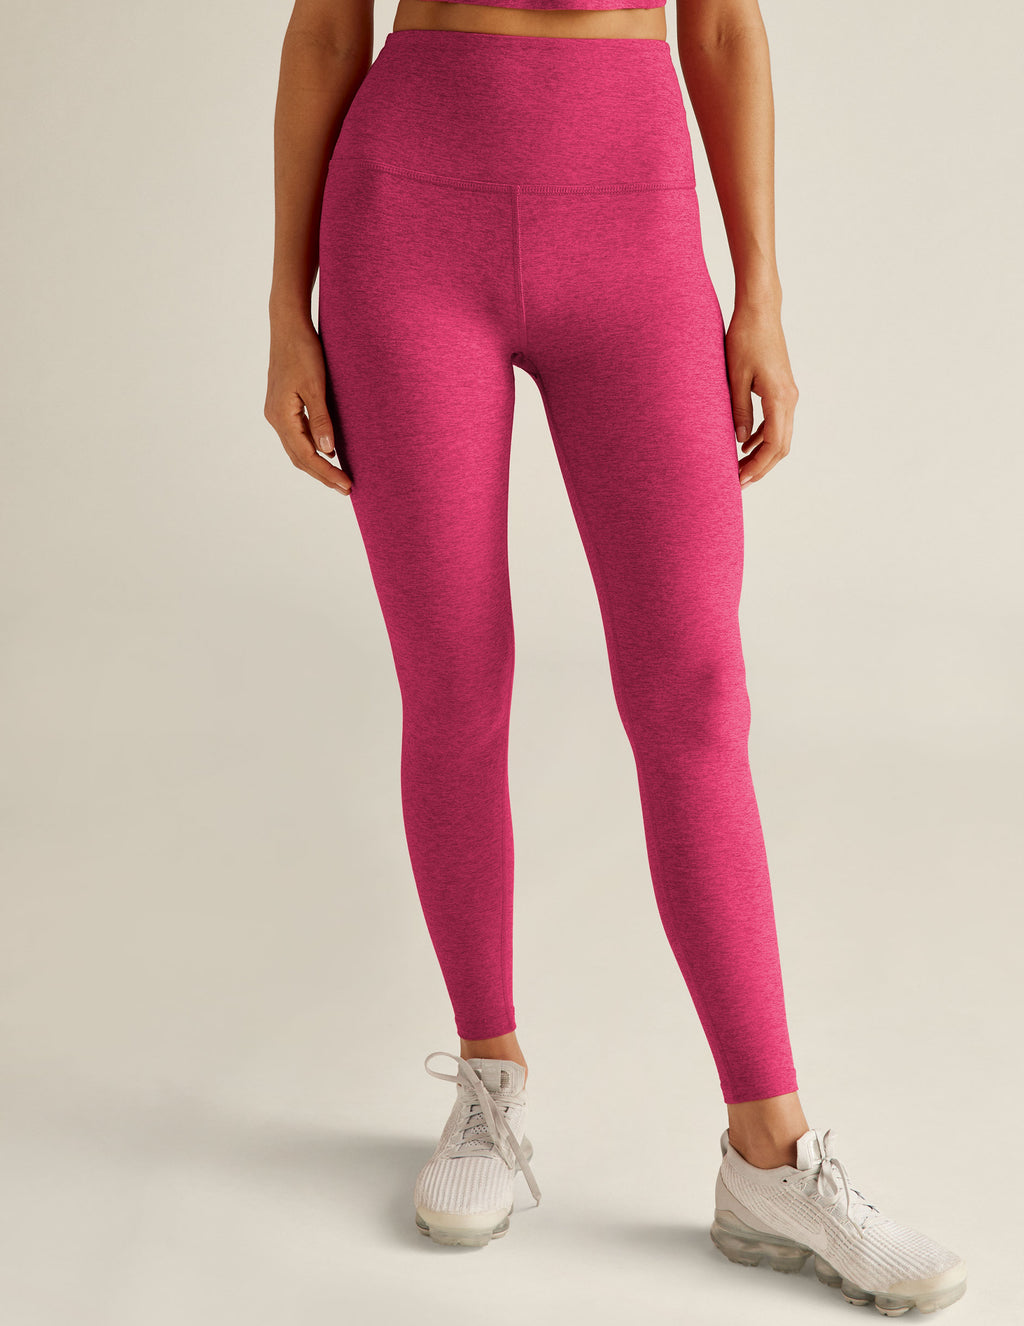 Women's Yoga Clothing - All Sale & Clearance Items